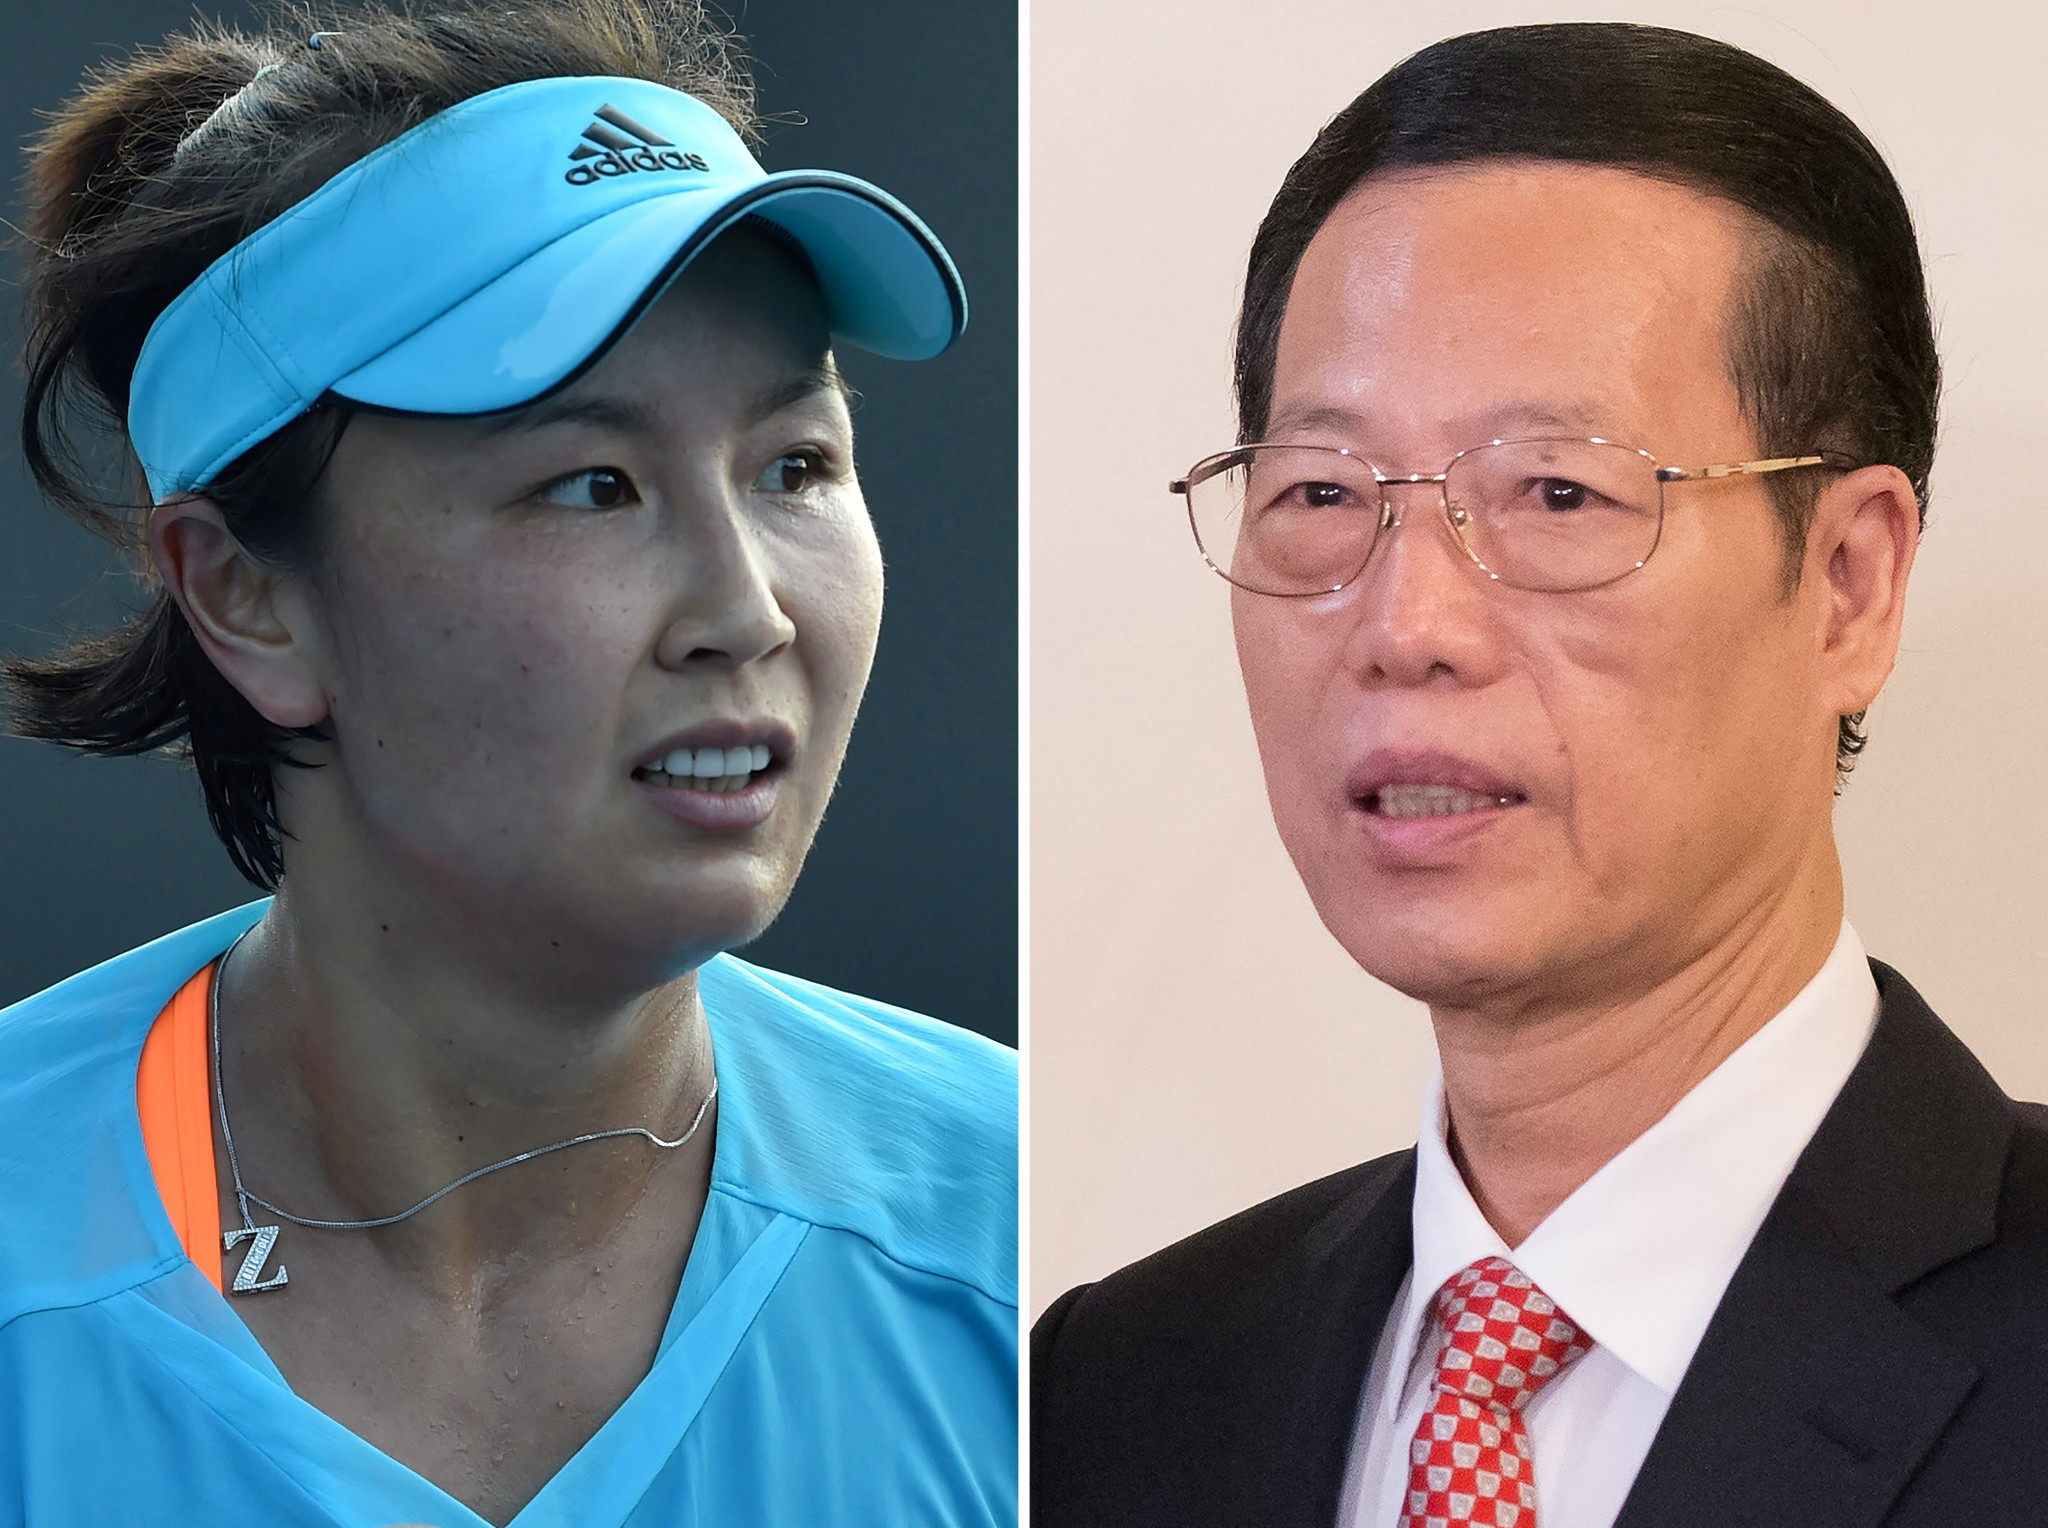 The disappearance of Peng Shuai, left, has increased calls for a boycott of Beijing 2022 after she accused Zhang Gaoli of sexual assault ©Getty Images